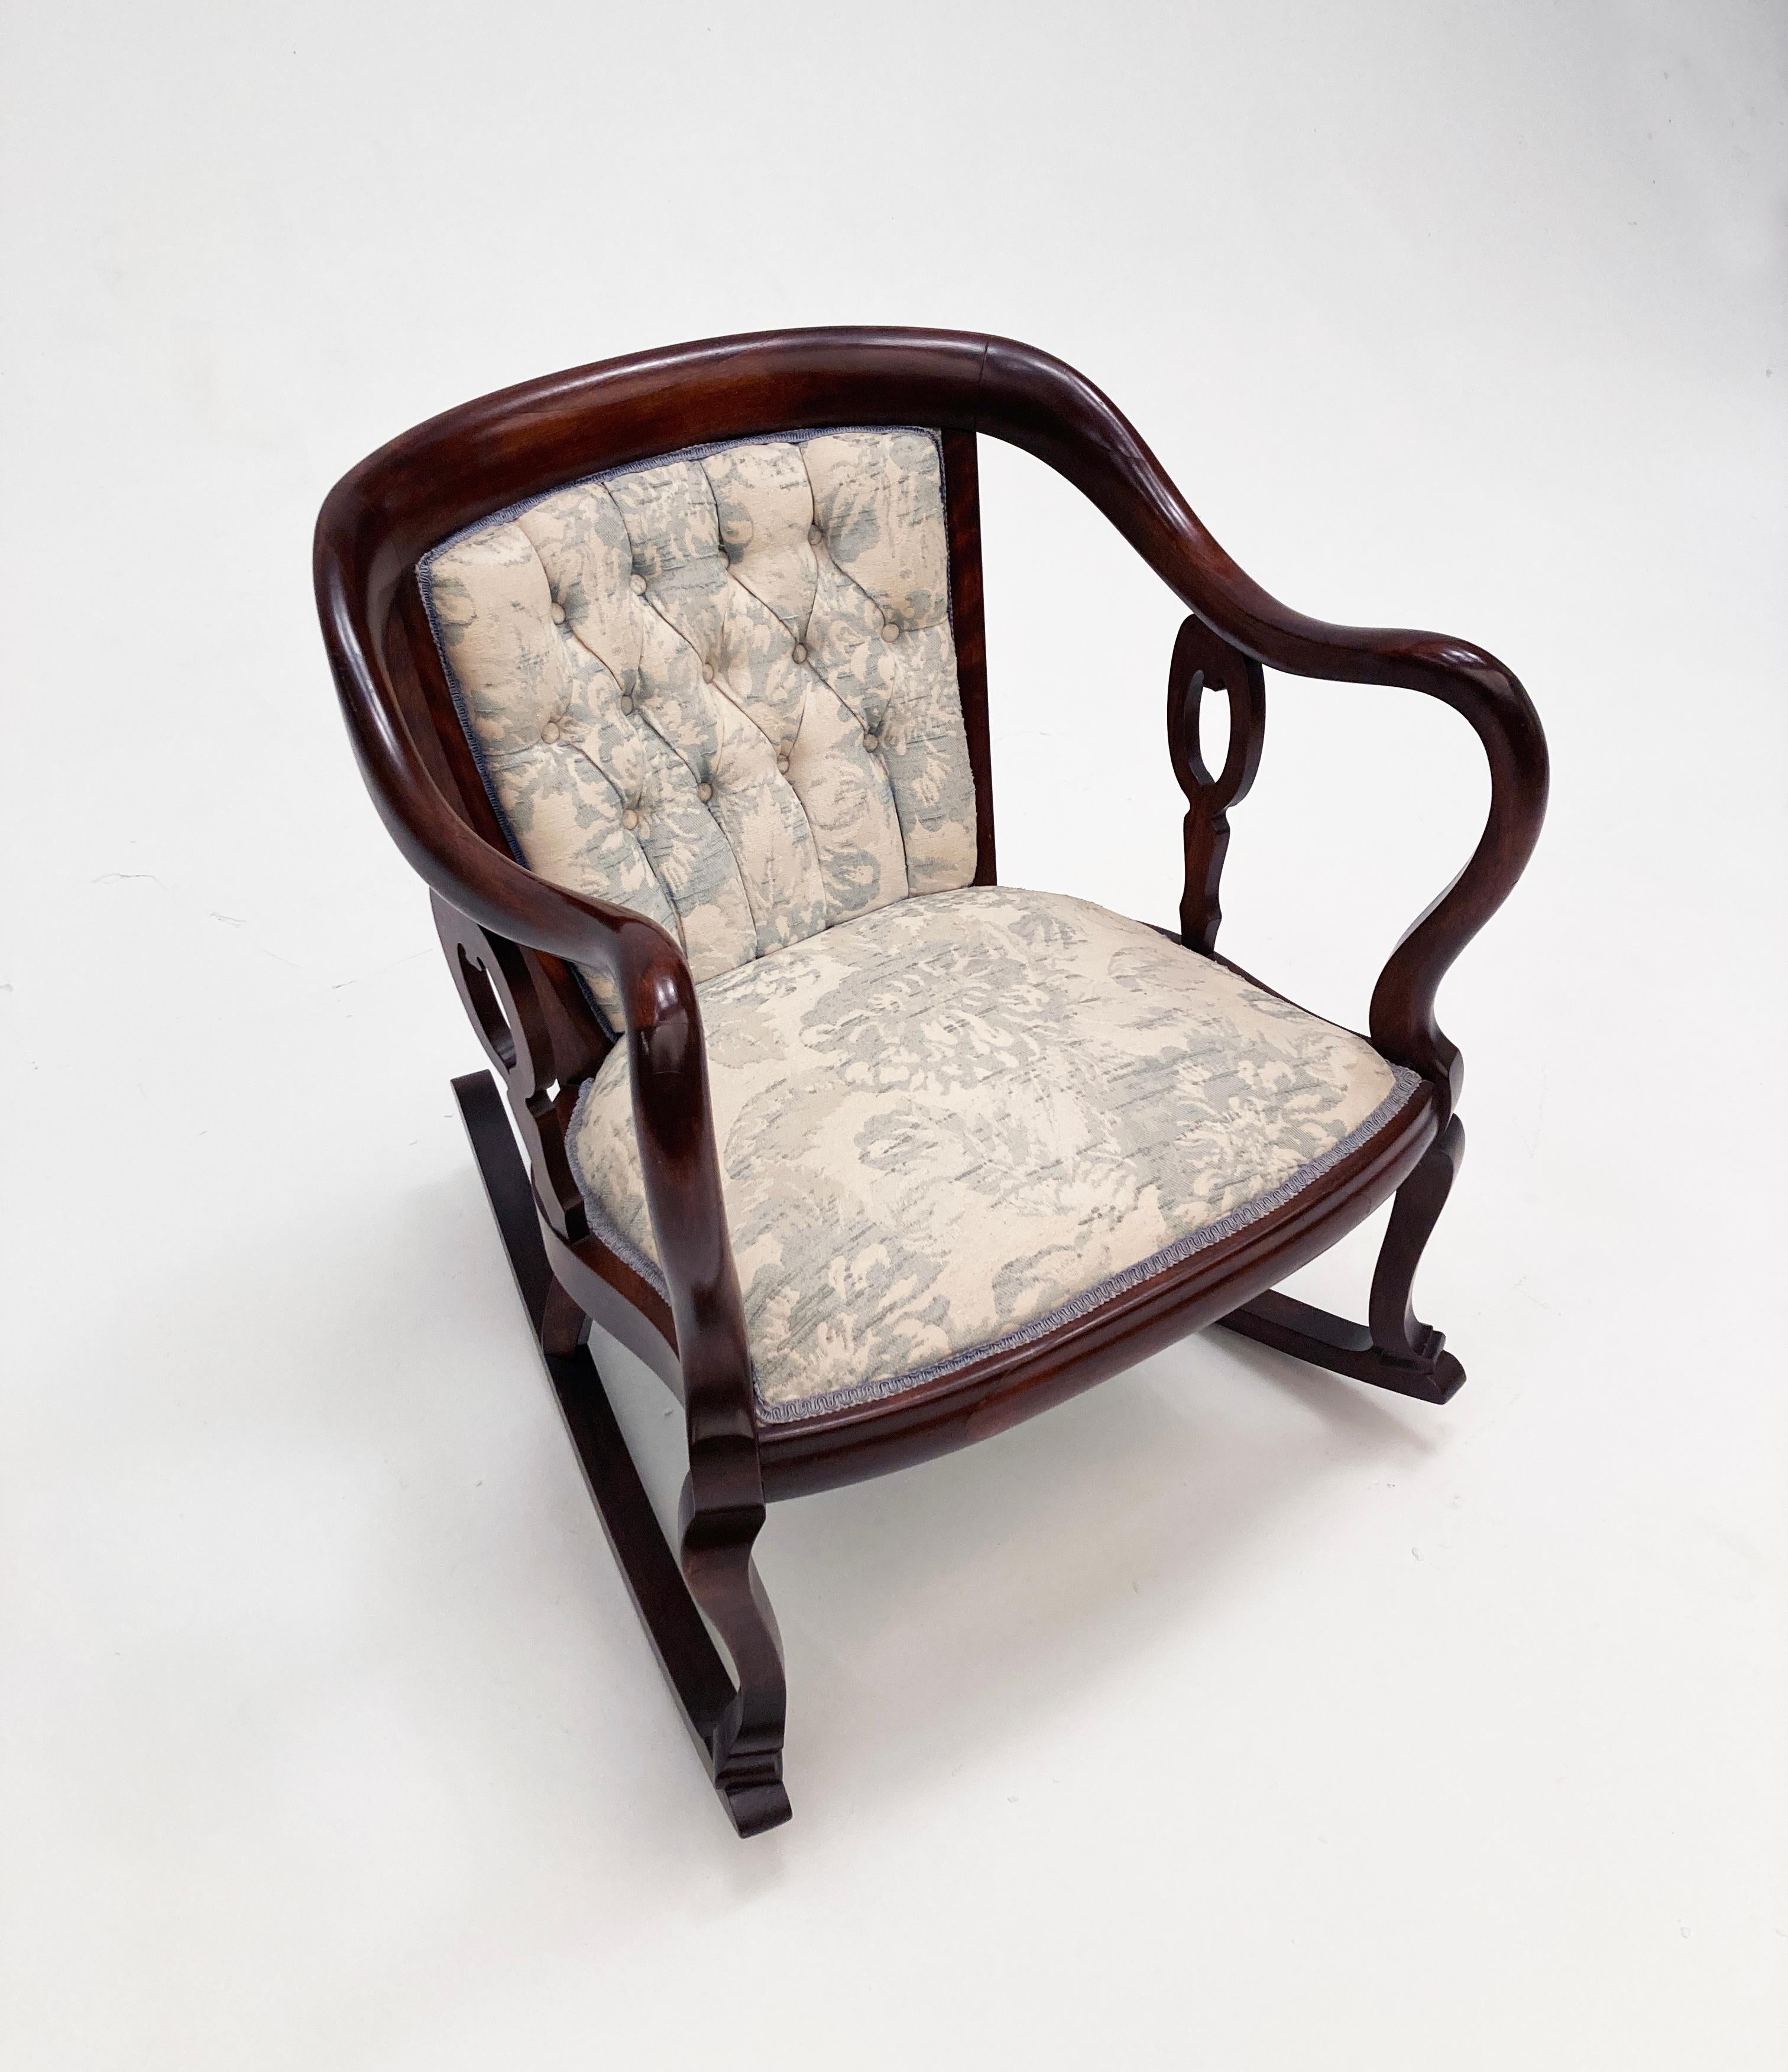 19th Century English Mahogany Settee, Chair and Rocker - Set of Three  For Sale 11